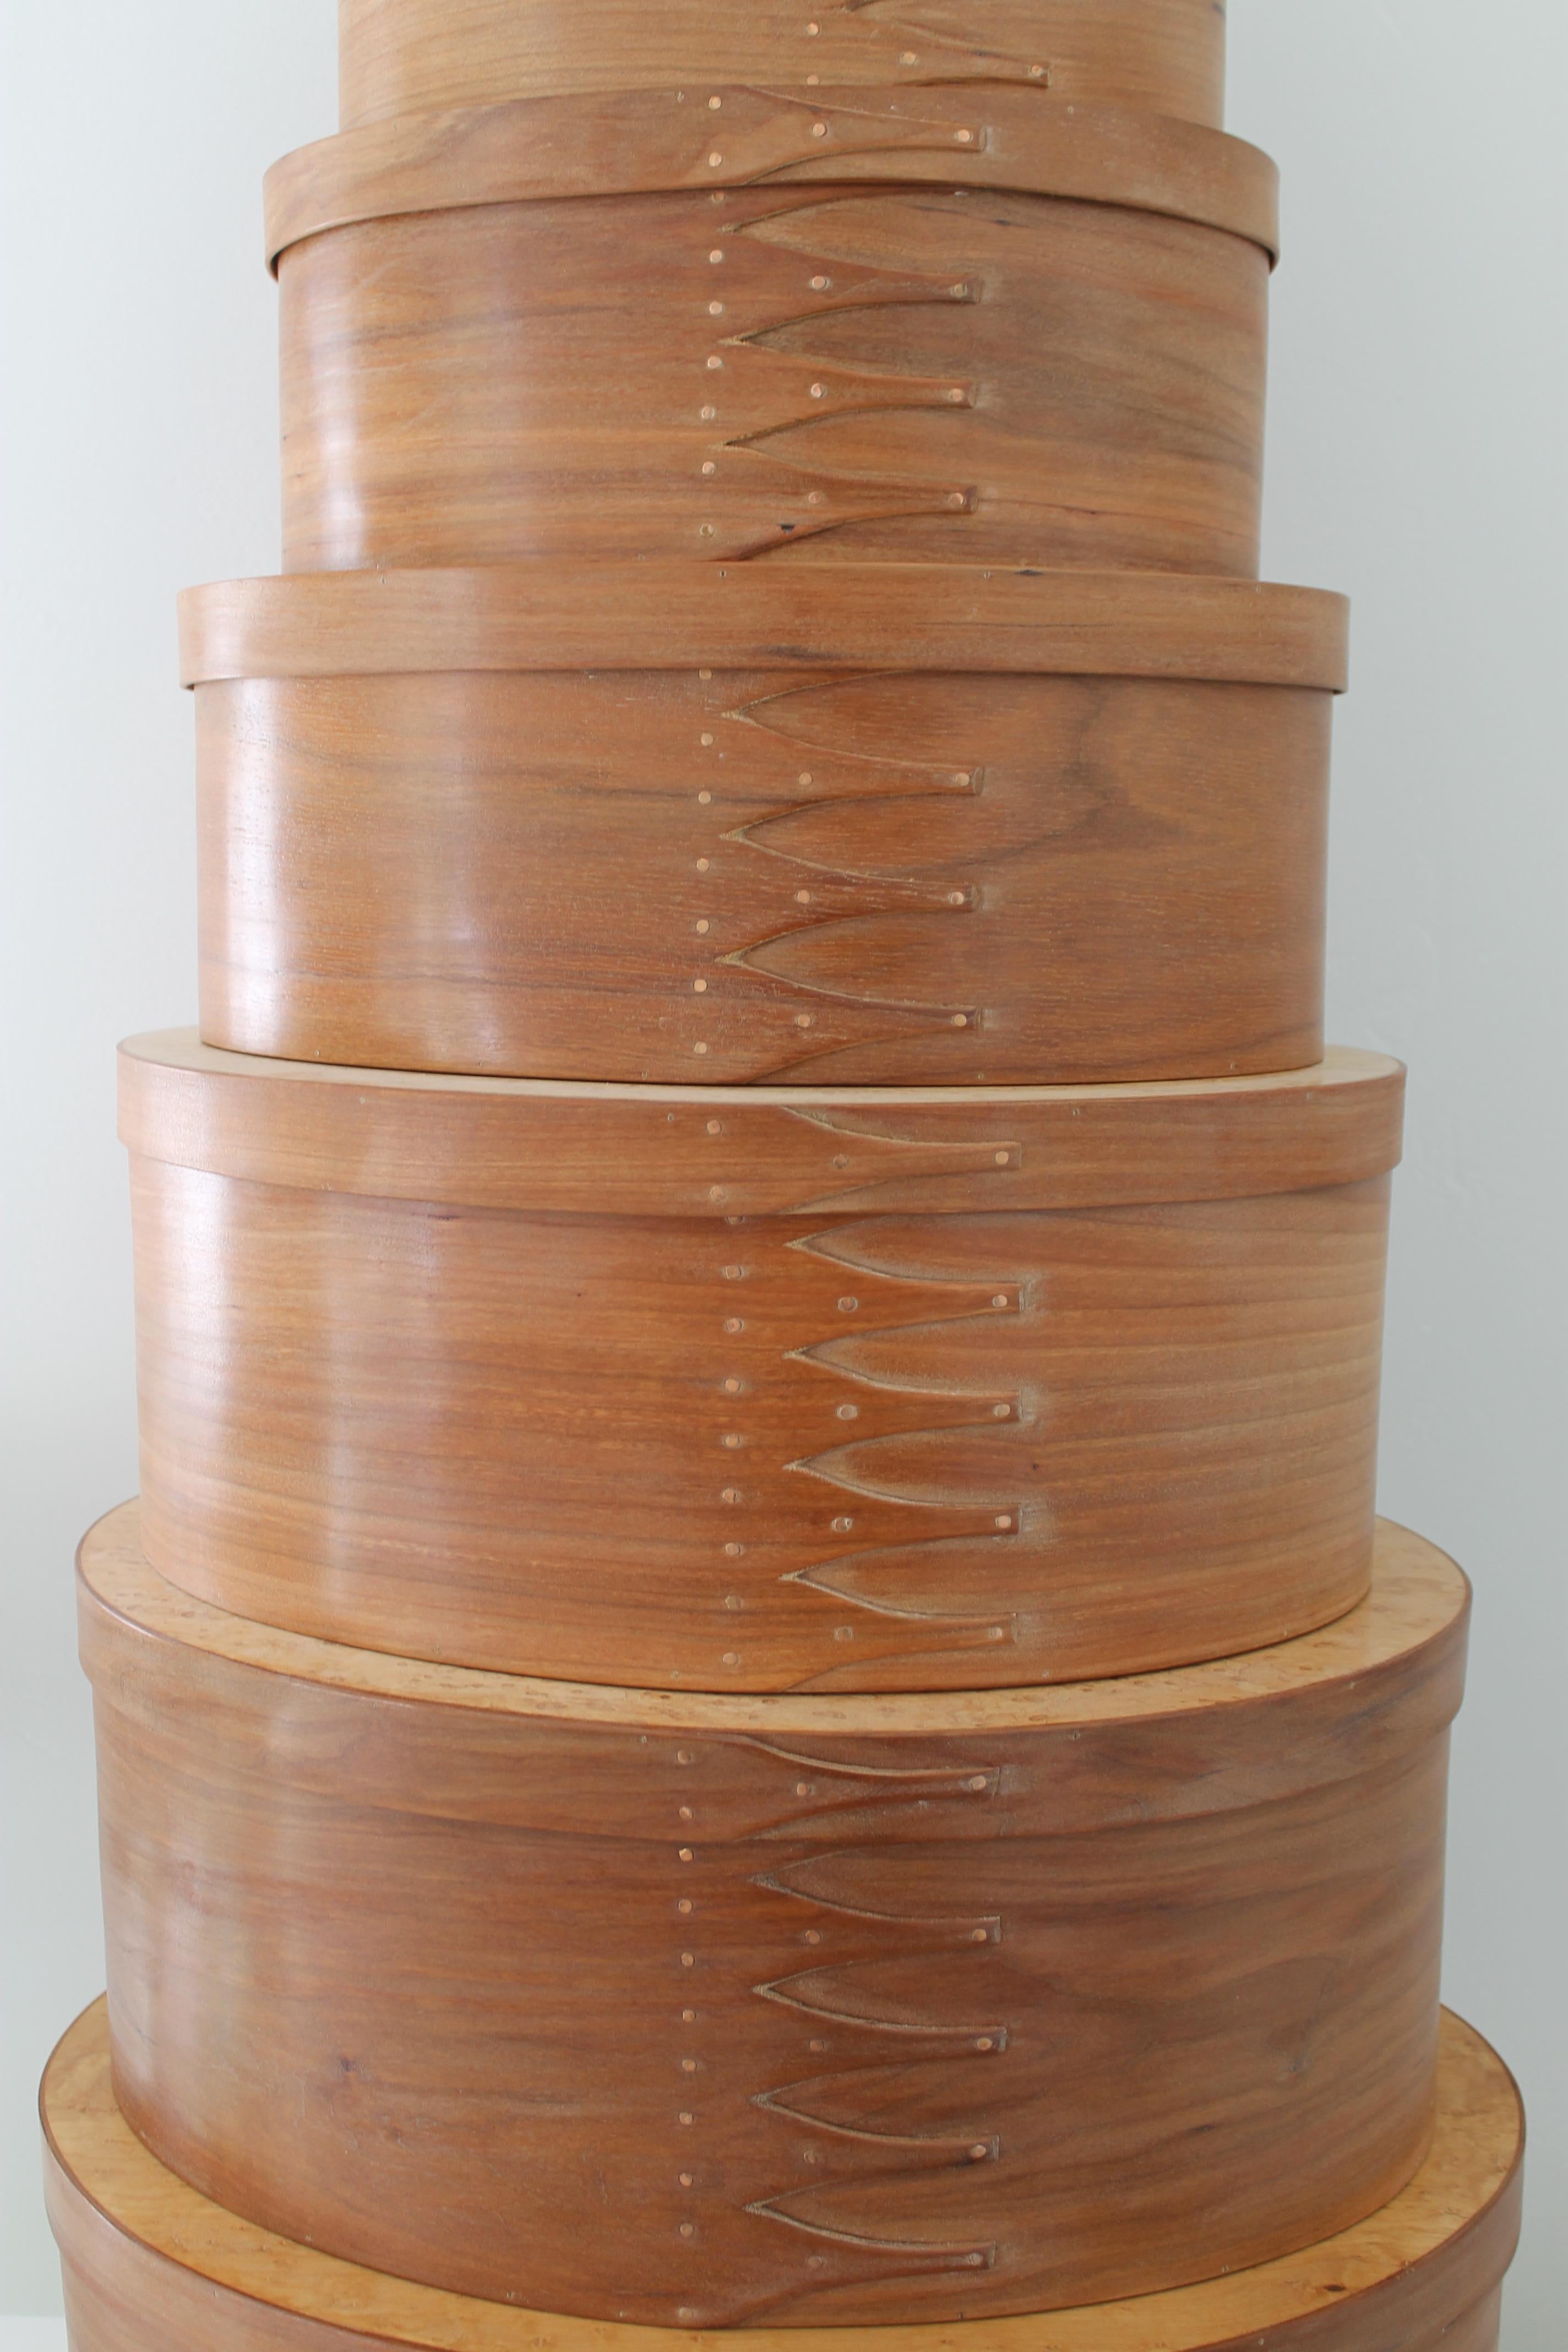 American Set of 11 Shaker Style Bent Wood Boxes by James Lynch, 2001 